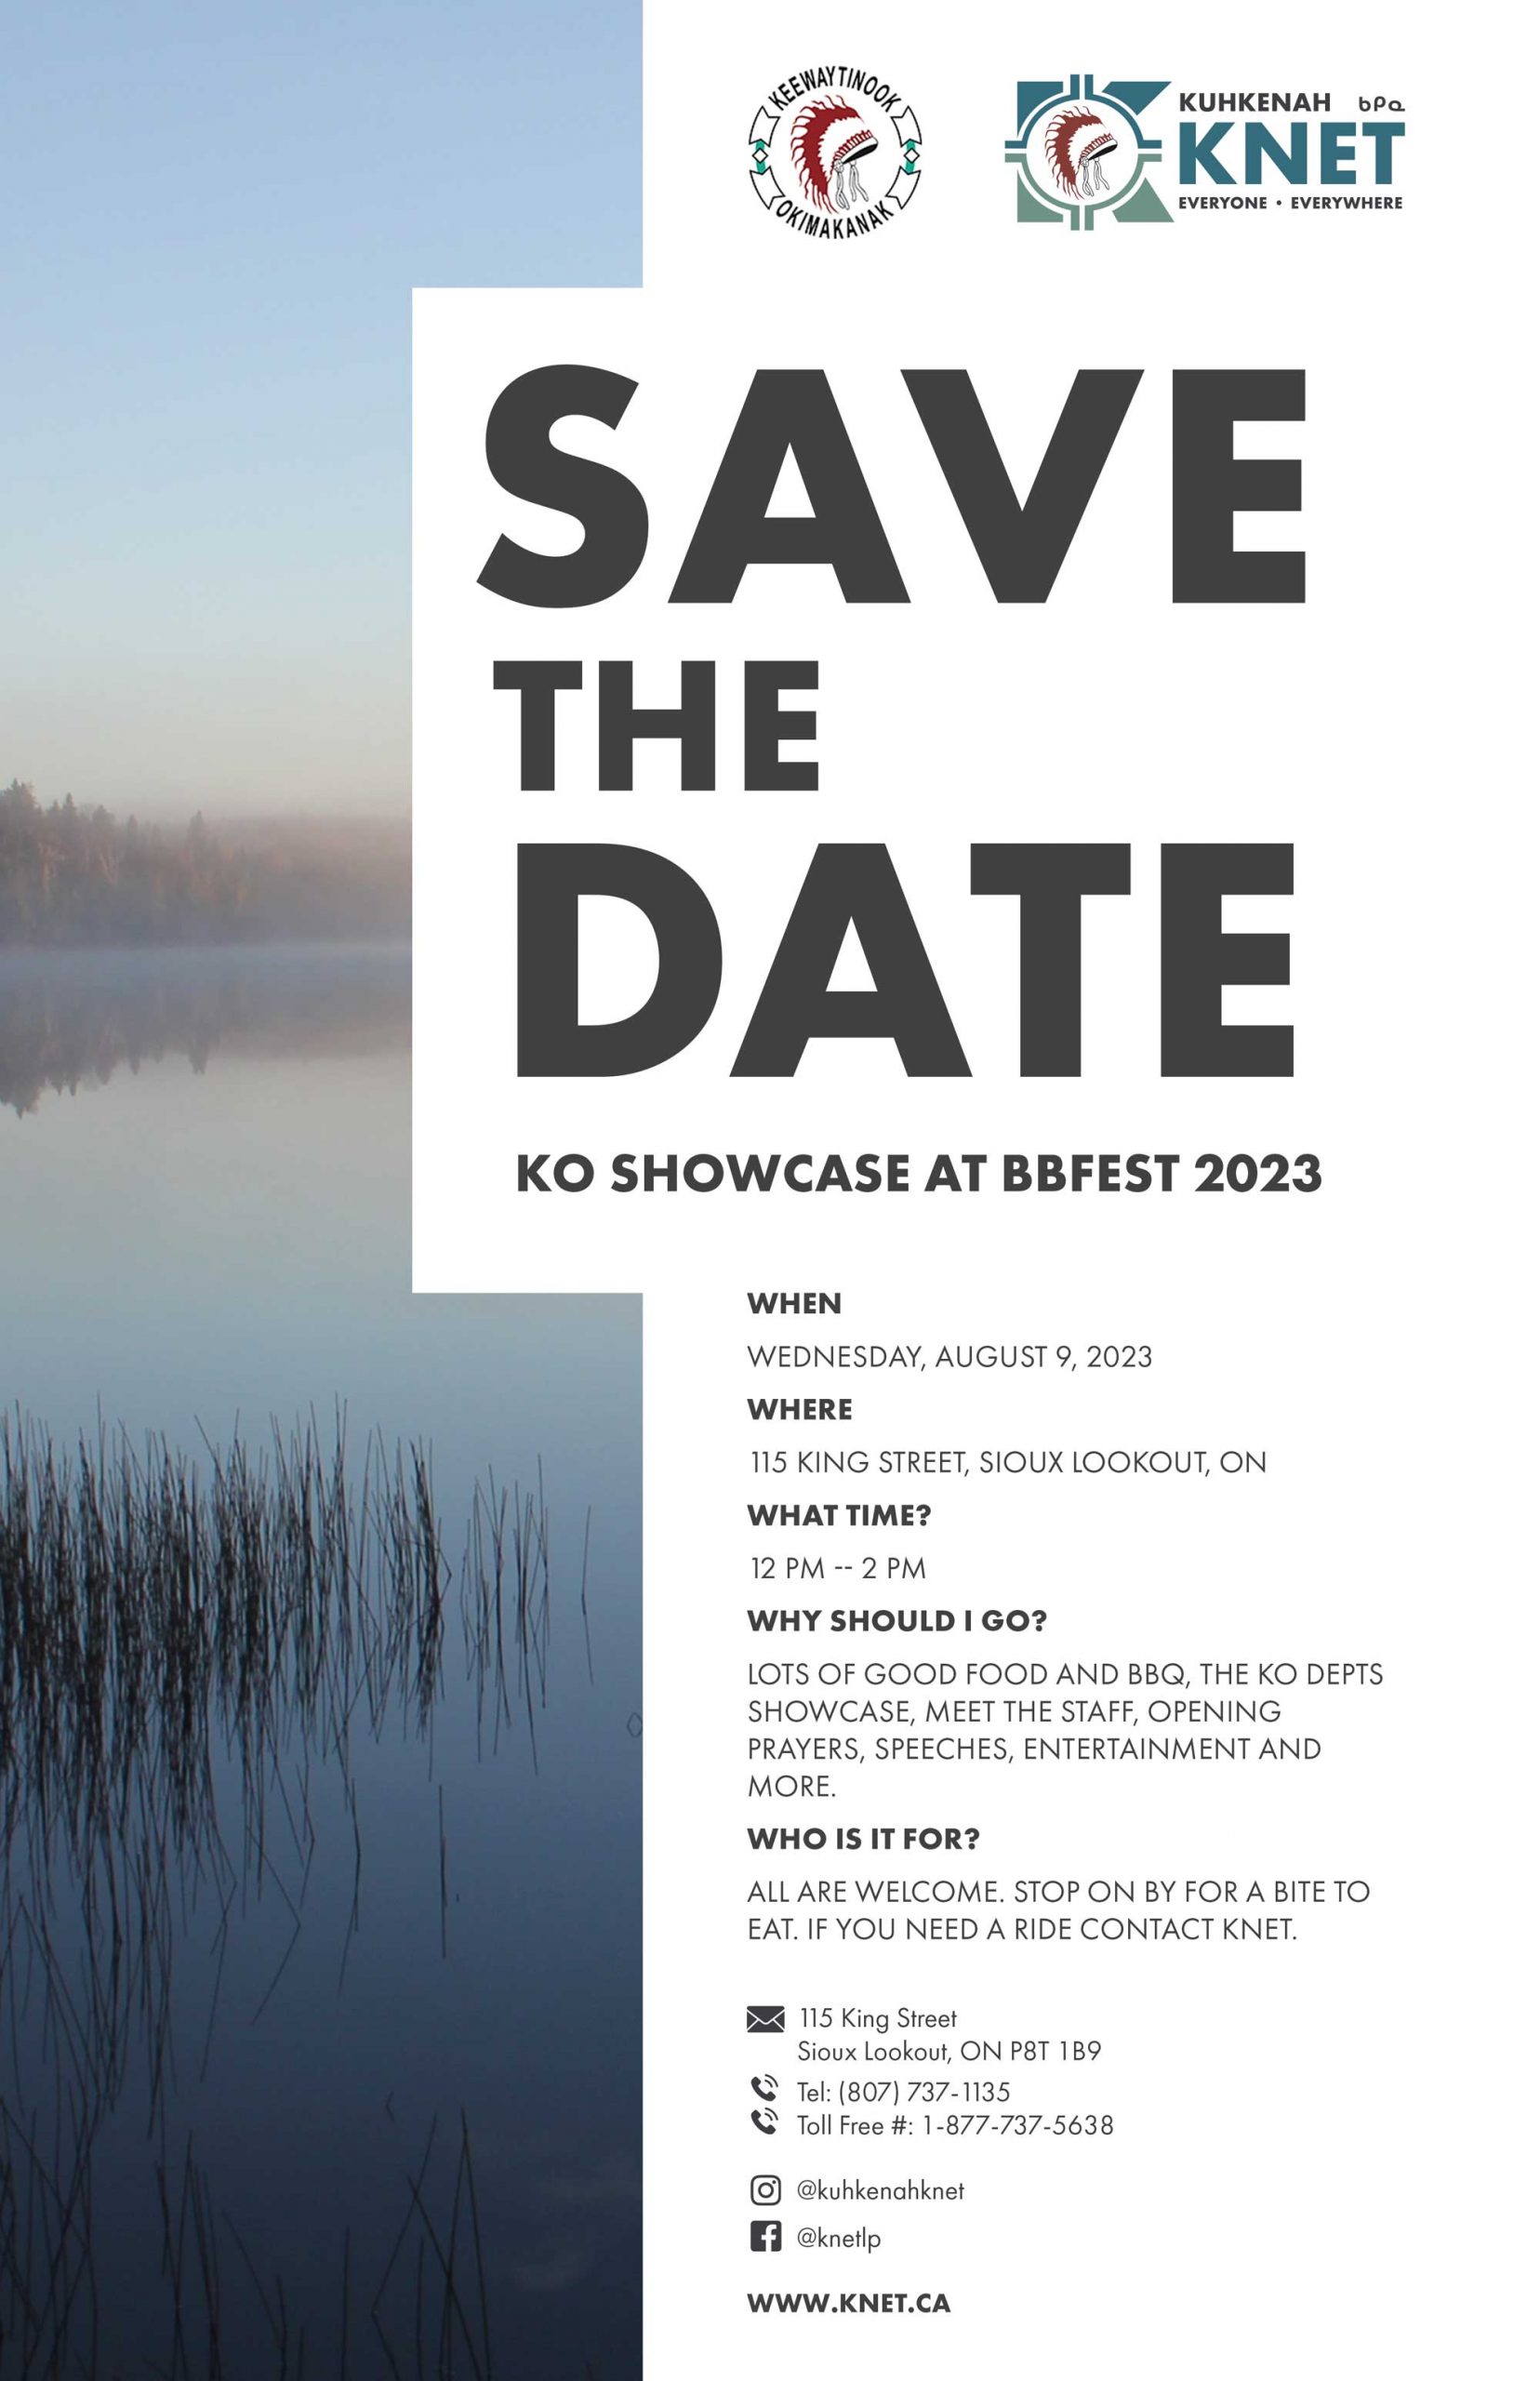 KO BBQ and Showcase hosted by KNET